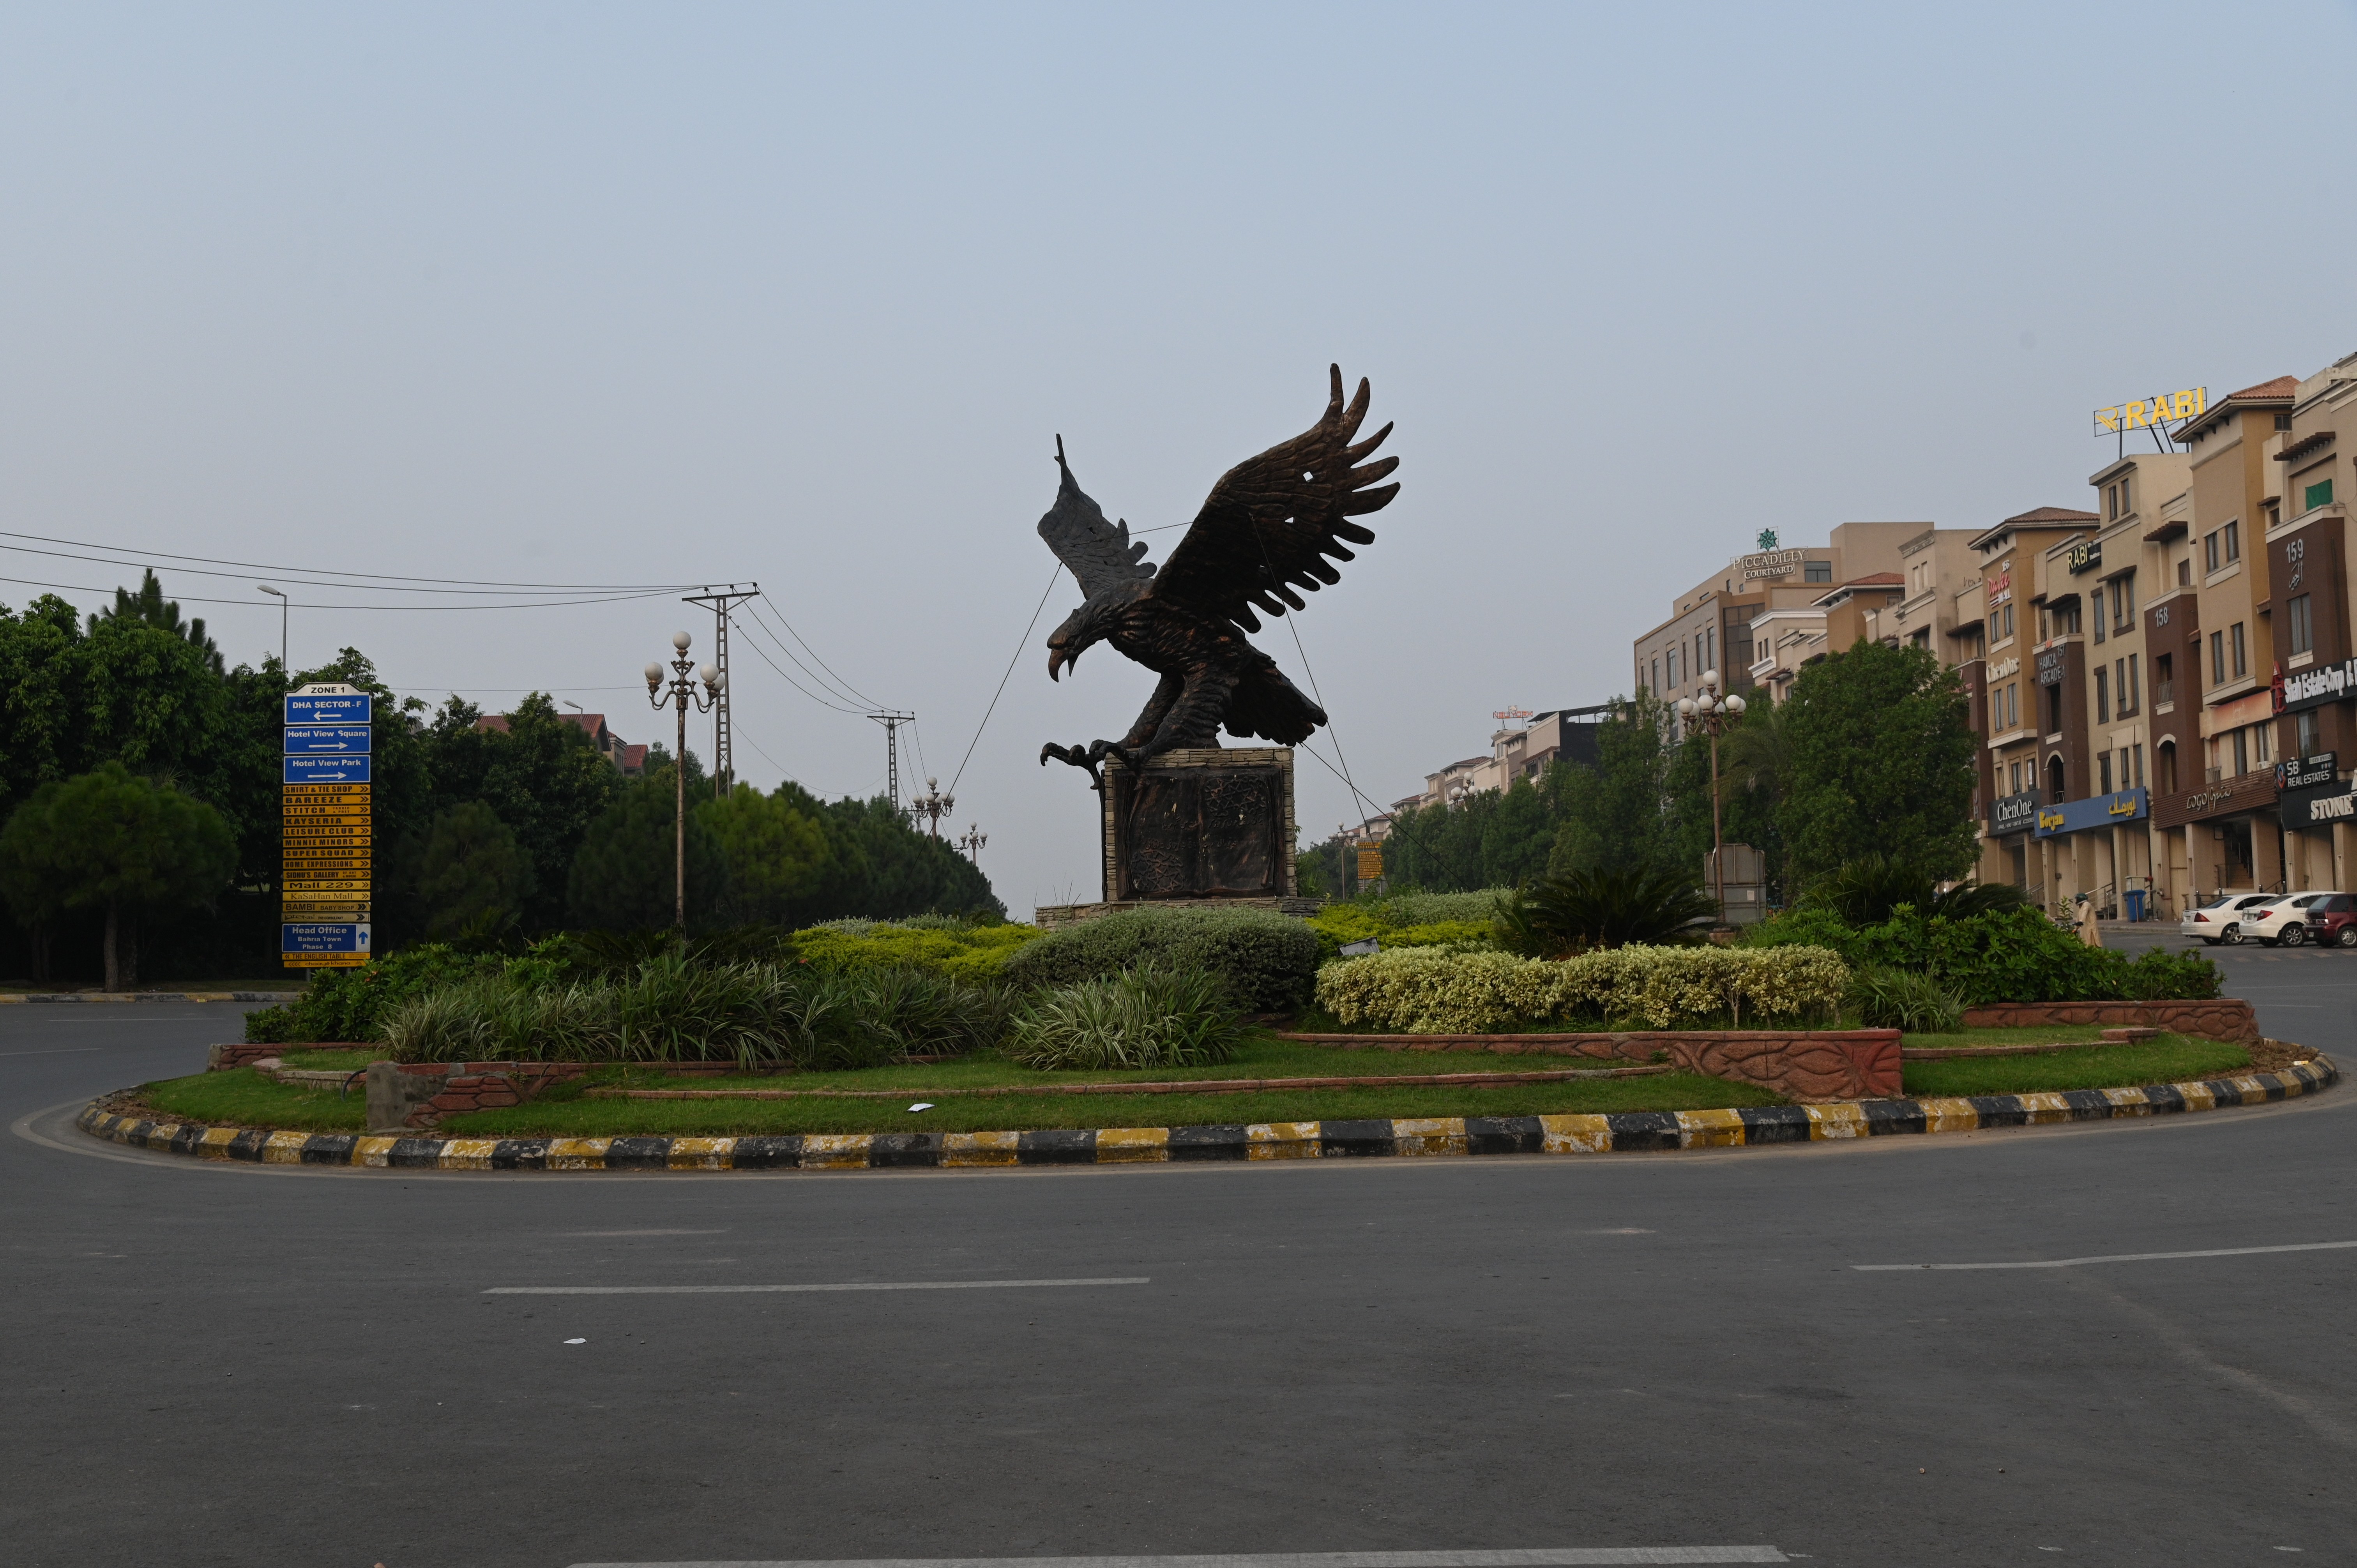 The sclupture of an eagle at the roundabout in DHA